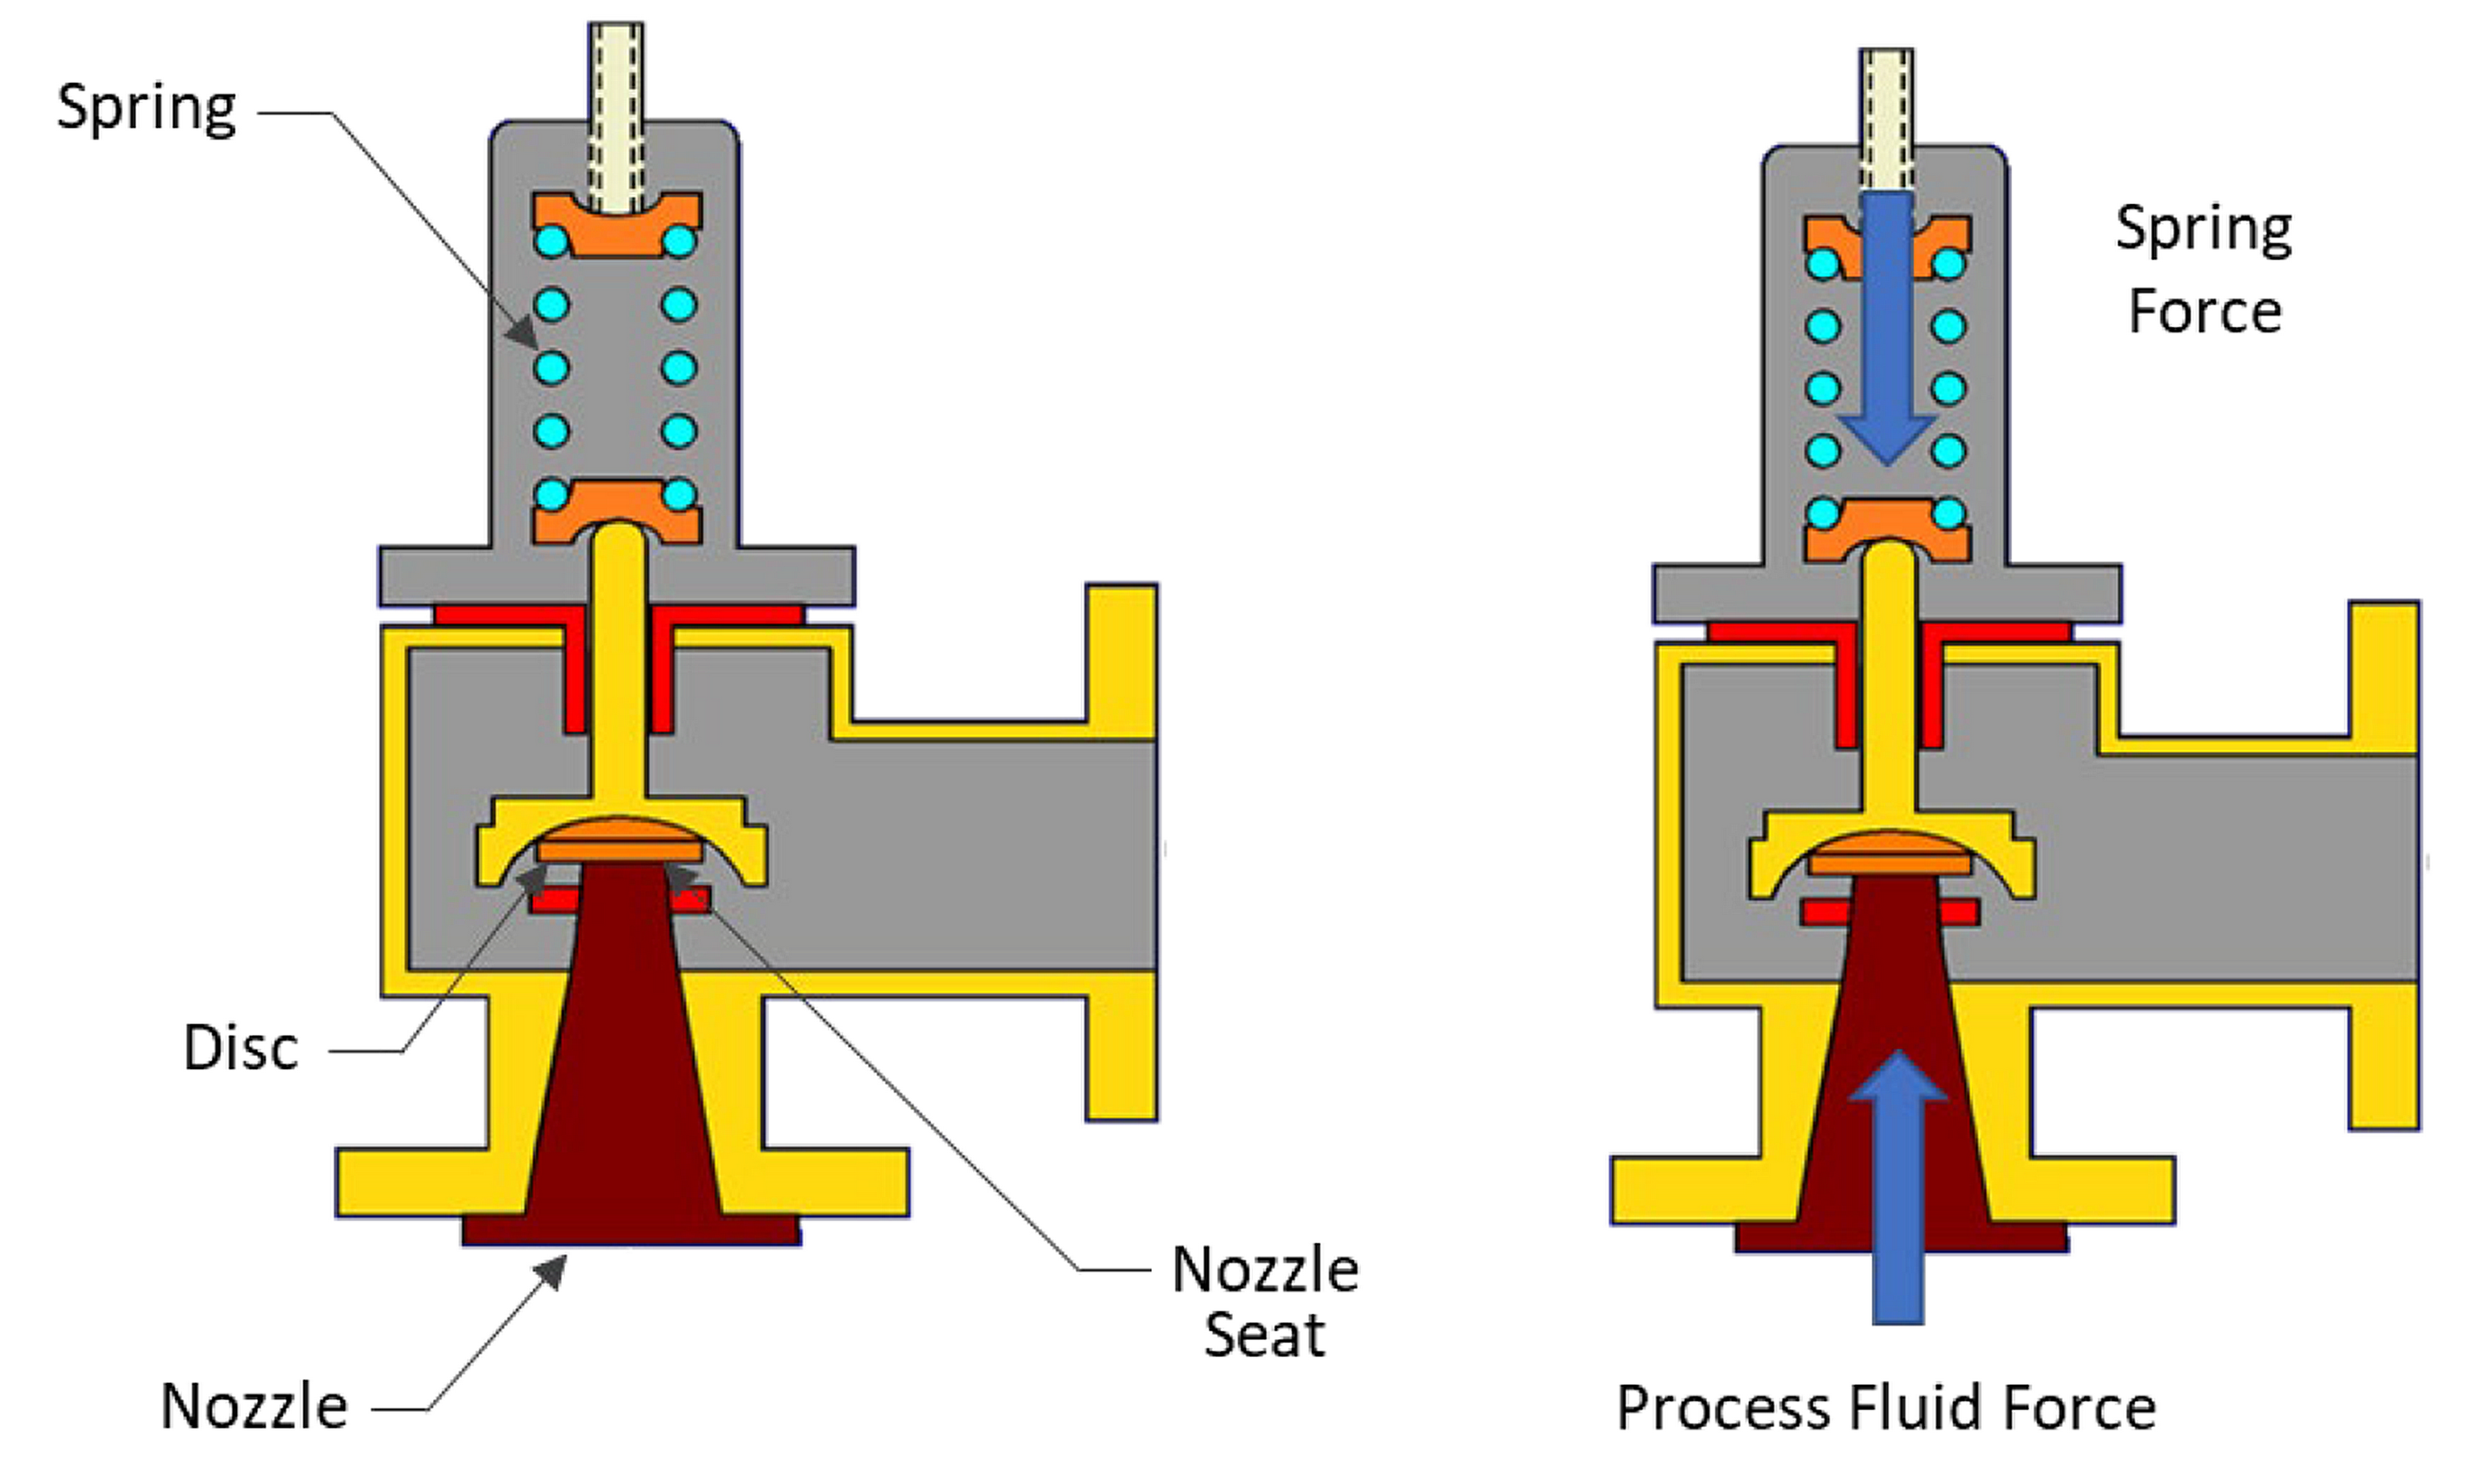 A pressure relief valve protects equipment by automatically venting the process media when pressure in the inlet nozzle overcomes the downward force of the spring (set pressure)